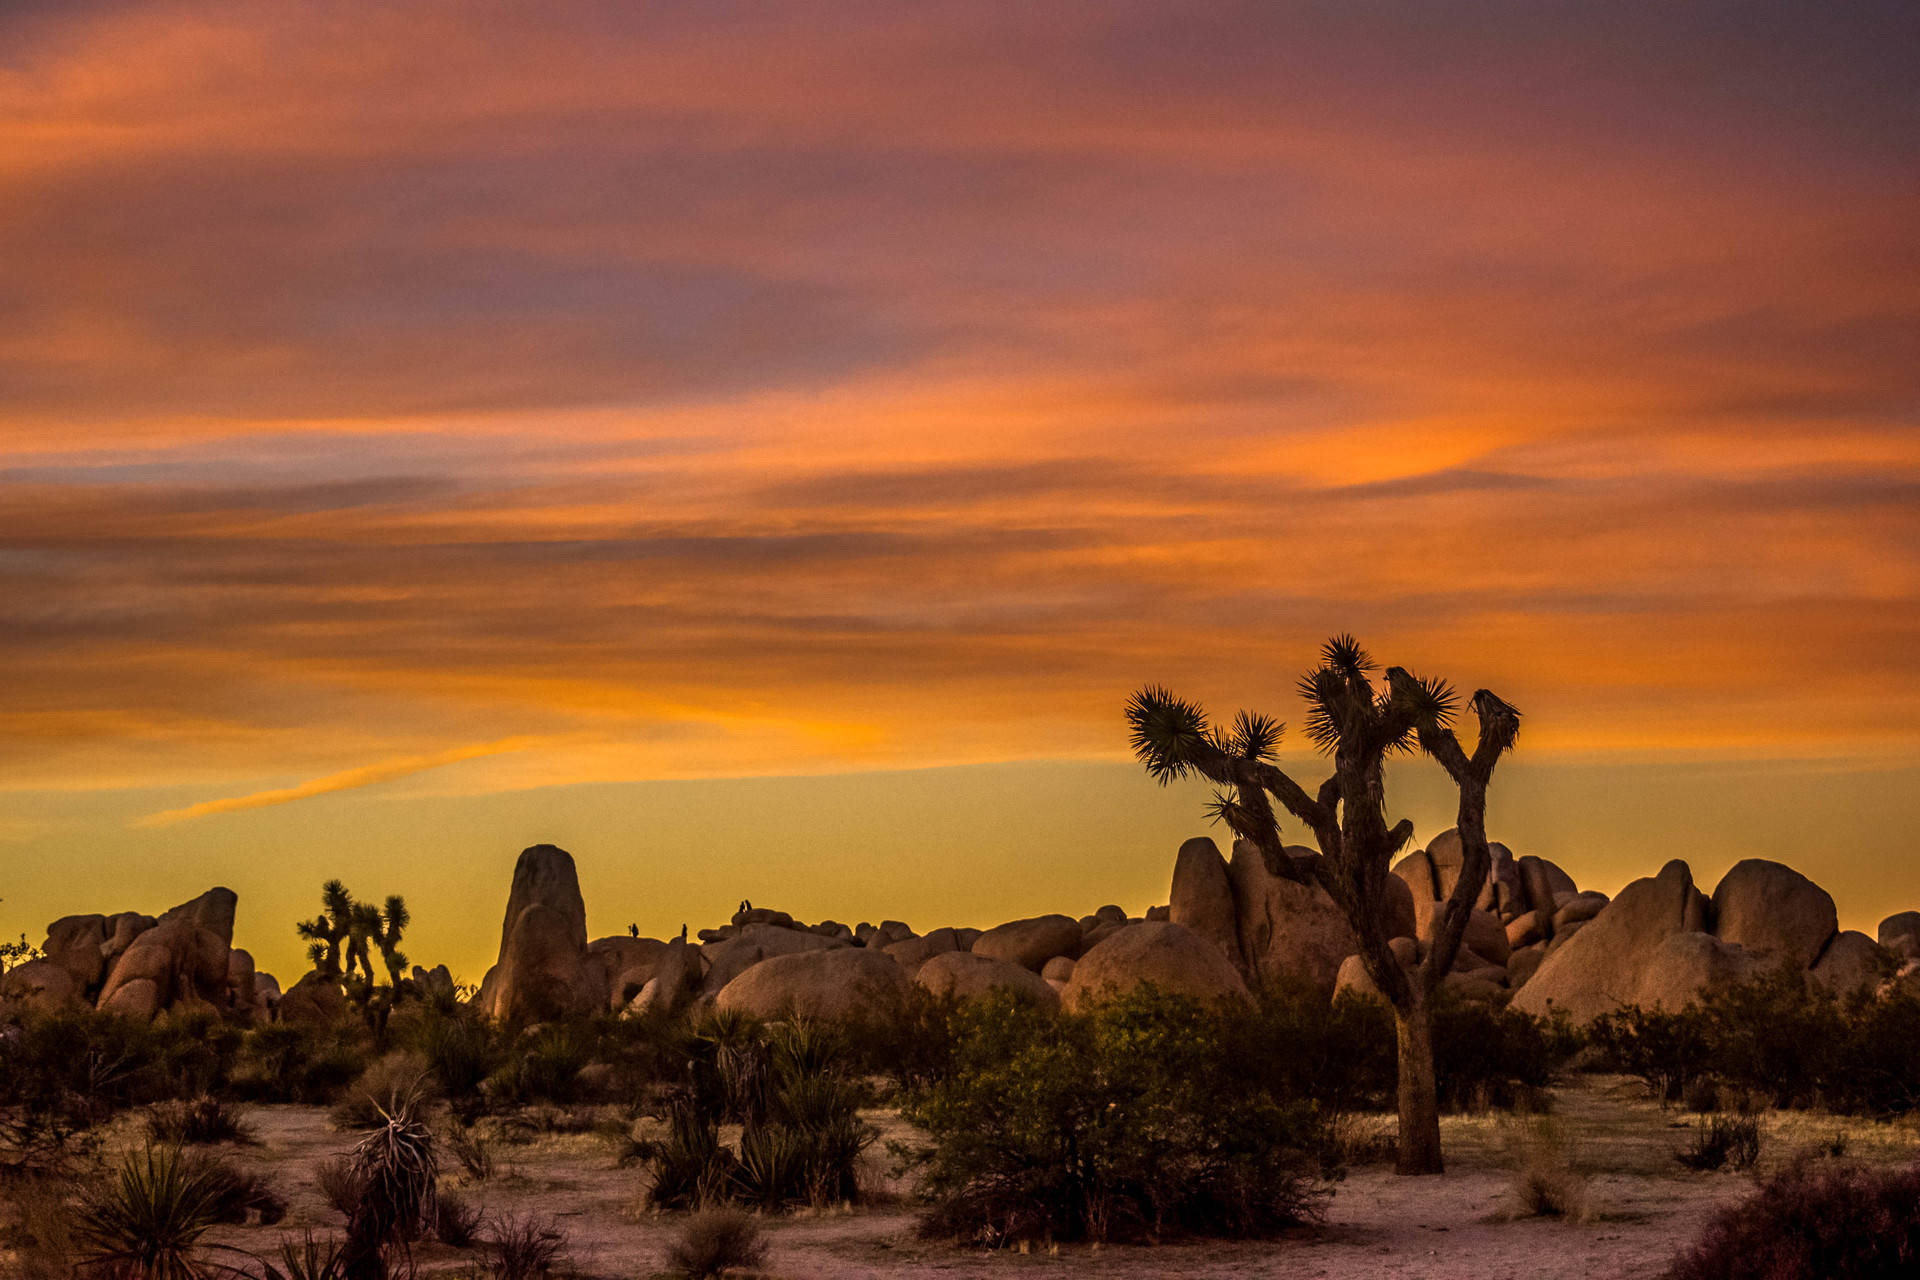 Joshua Tree National Park, free to enter (along with all the rest of them) this Sunday, Aug. 25. Ashley Urdang/KQED